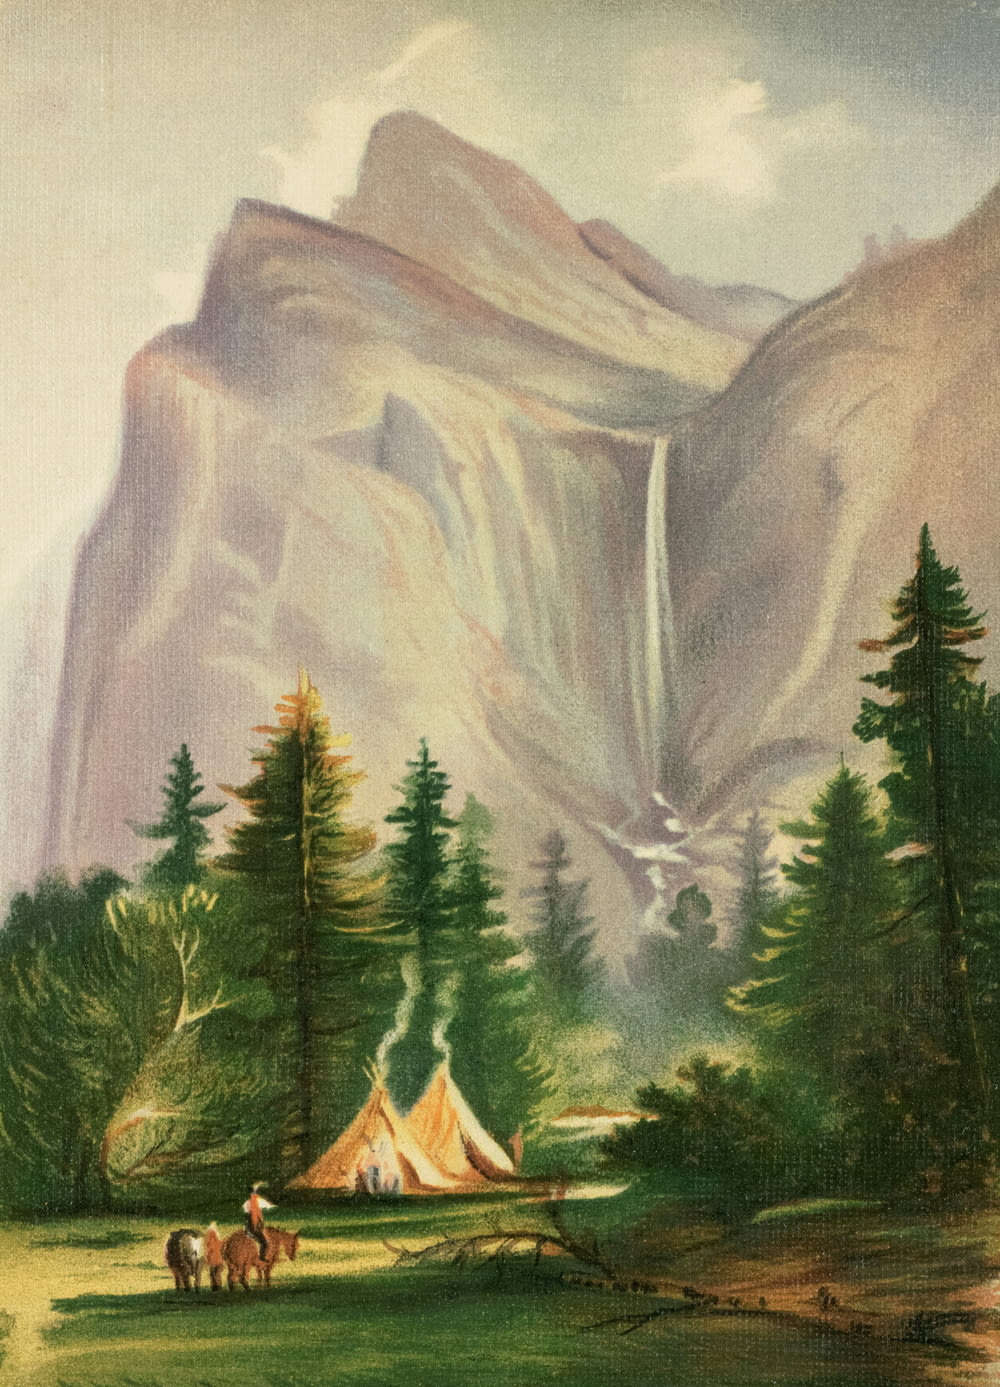 a painting of a mountain scene with a tent and horses